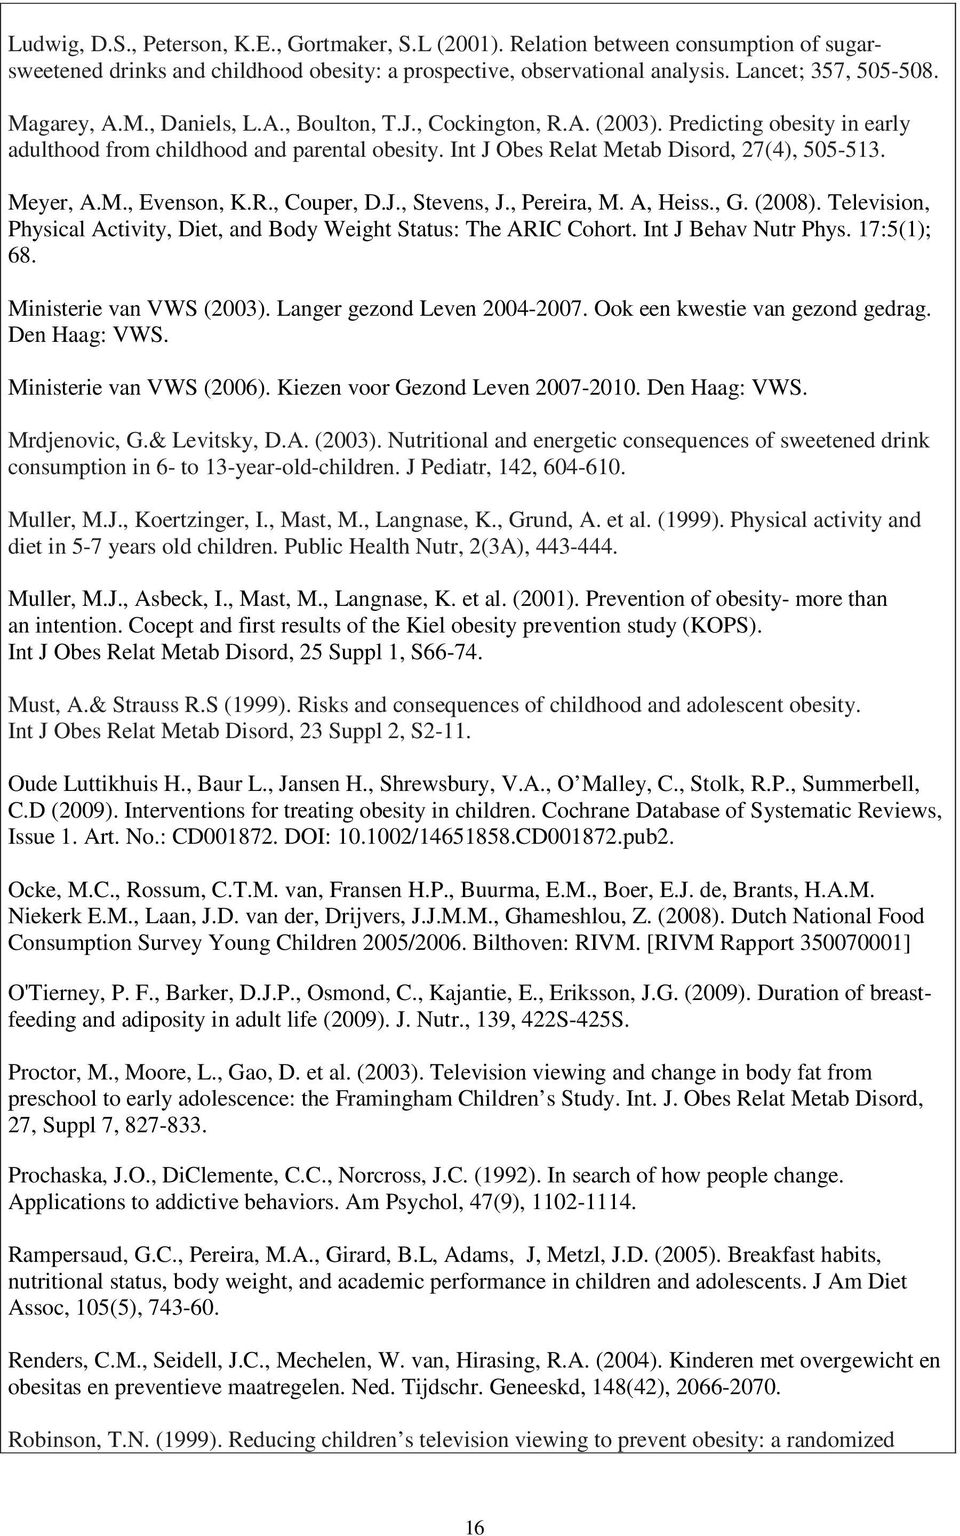 Meyer, A.M., Evenson, K.R., Couper, D.J., Stevens, J., Pereira, M. A, Heiss., G. (2008). Television, Physical Activity, Diet, and Body Weight Status: The ARIC Cohort. Int J Behav Nutr Phys.